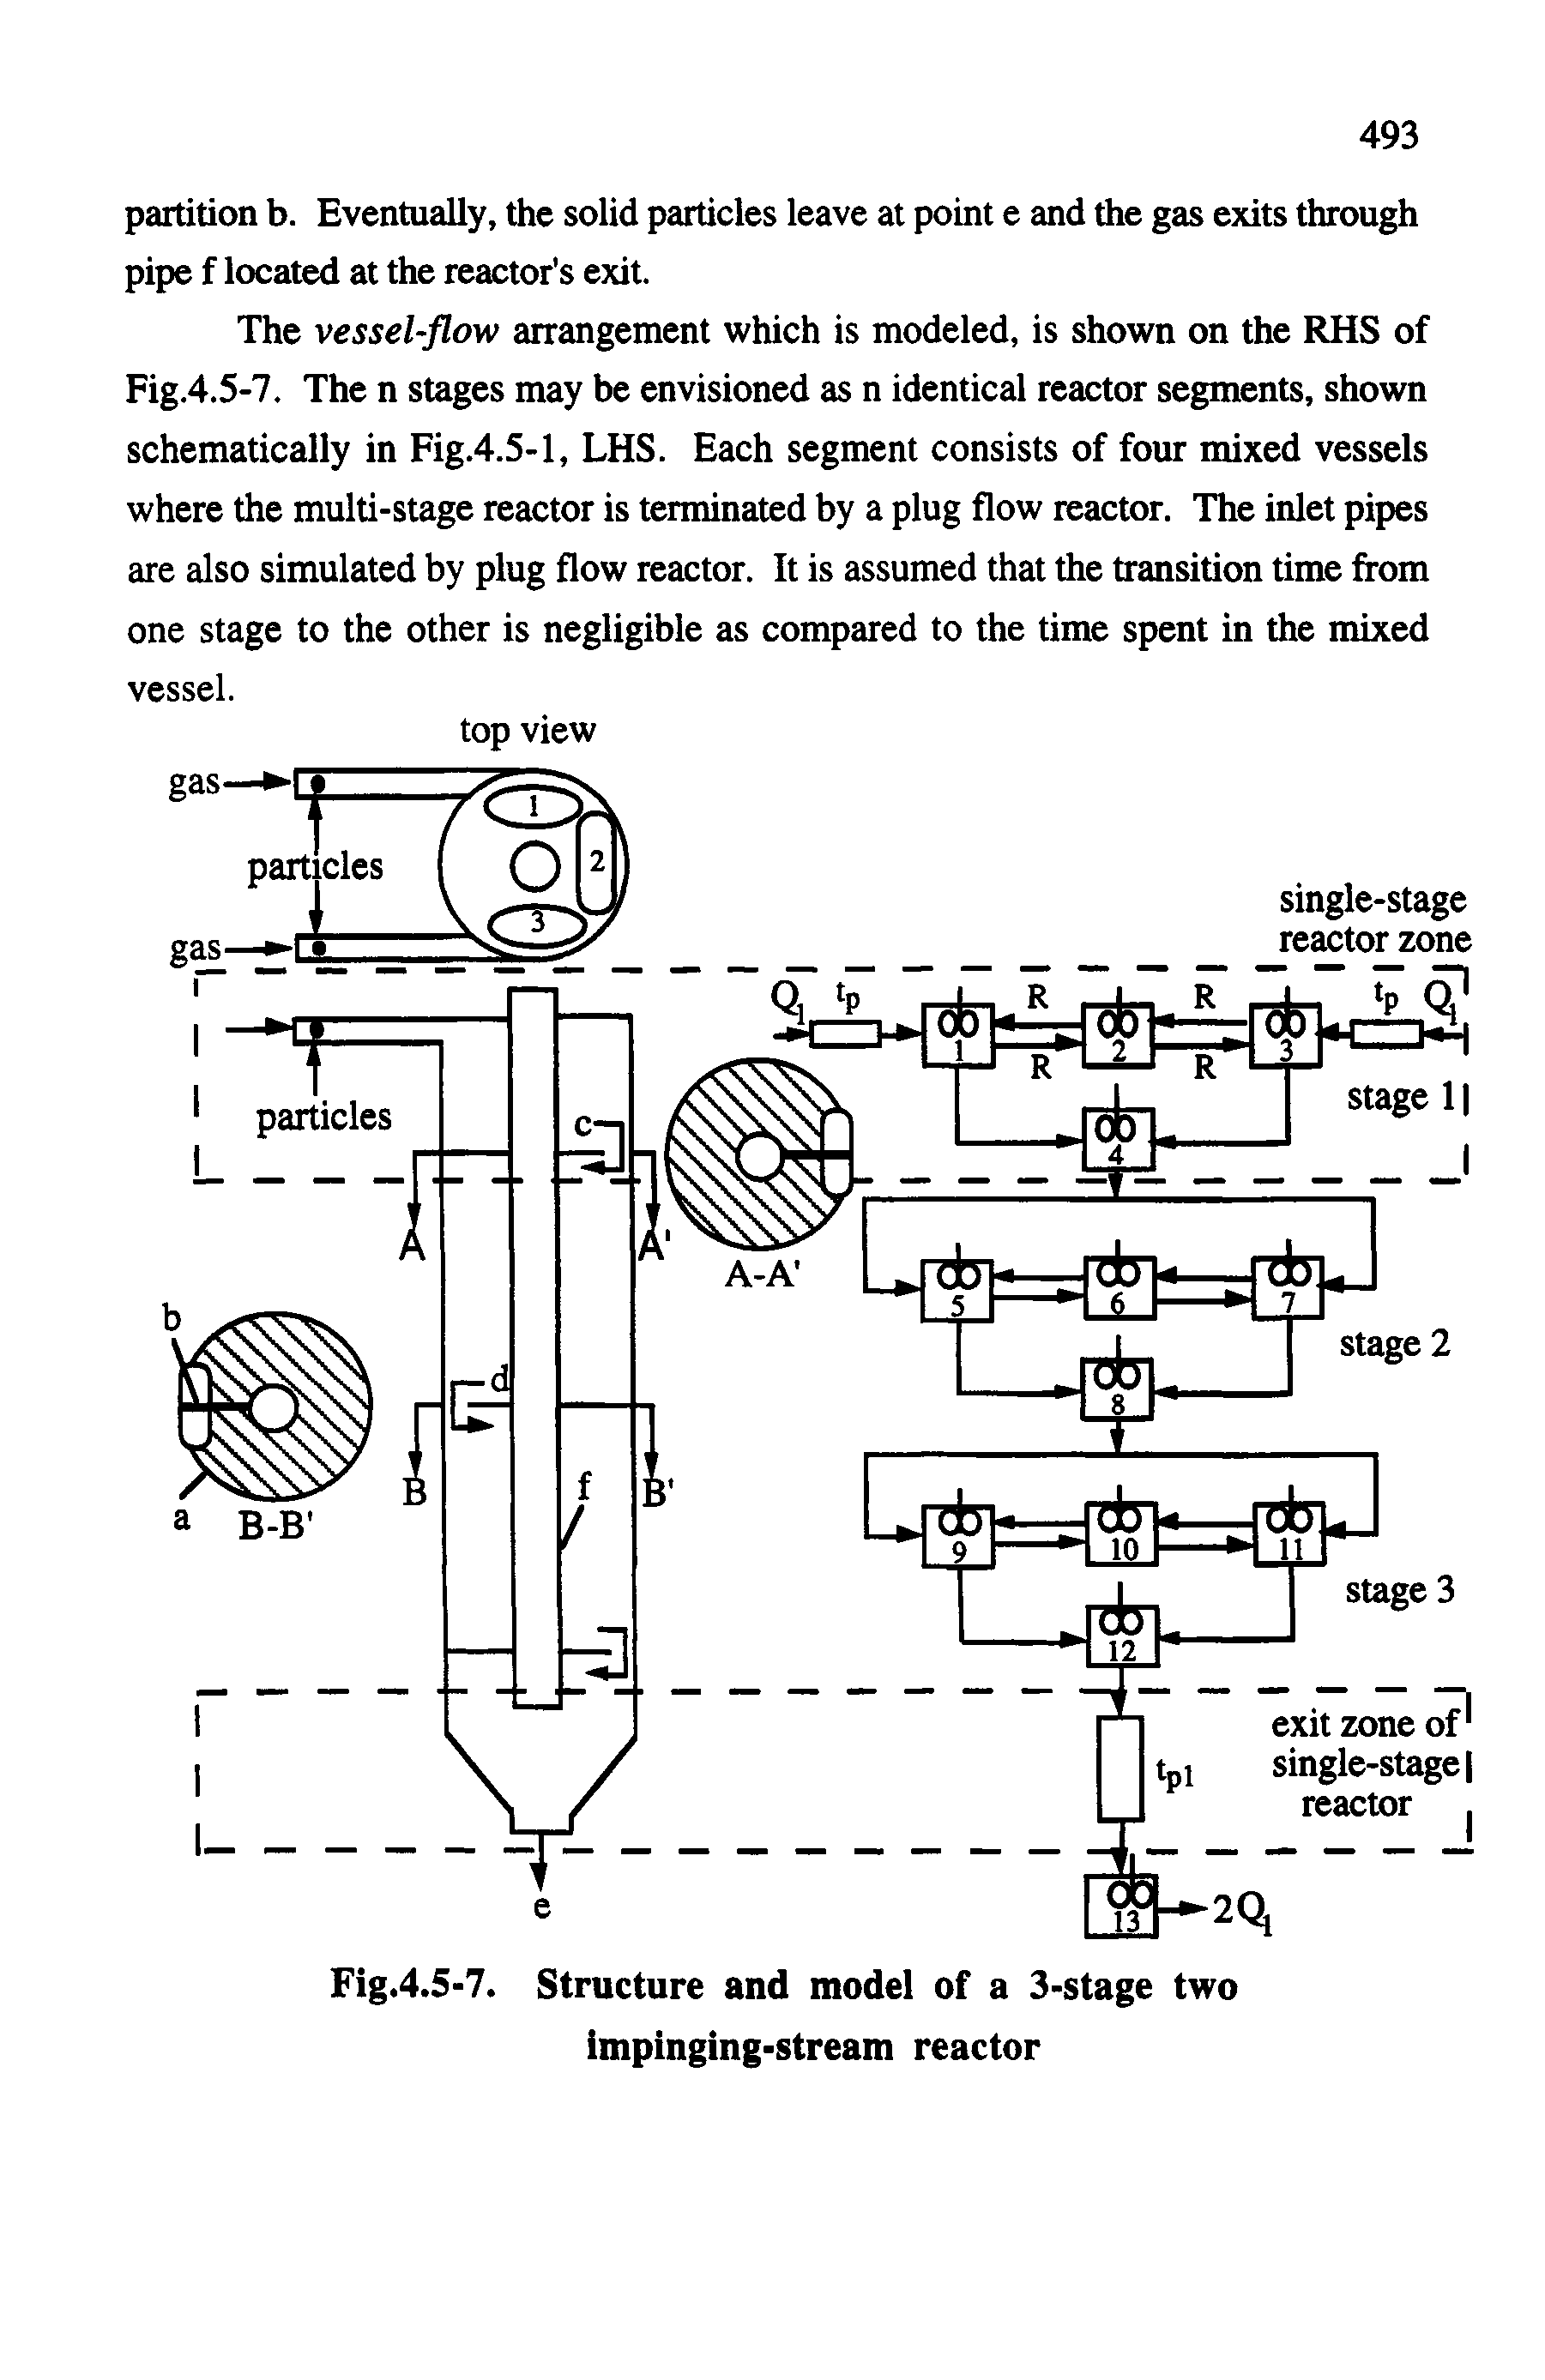 Fig.4.5-7. Structure and model of a 3-stage two impinging-stream reactor...